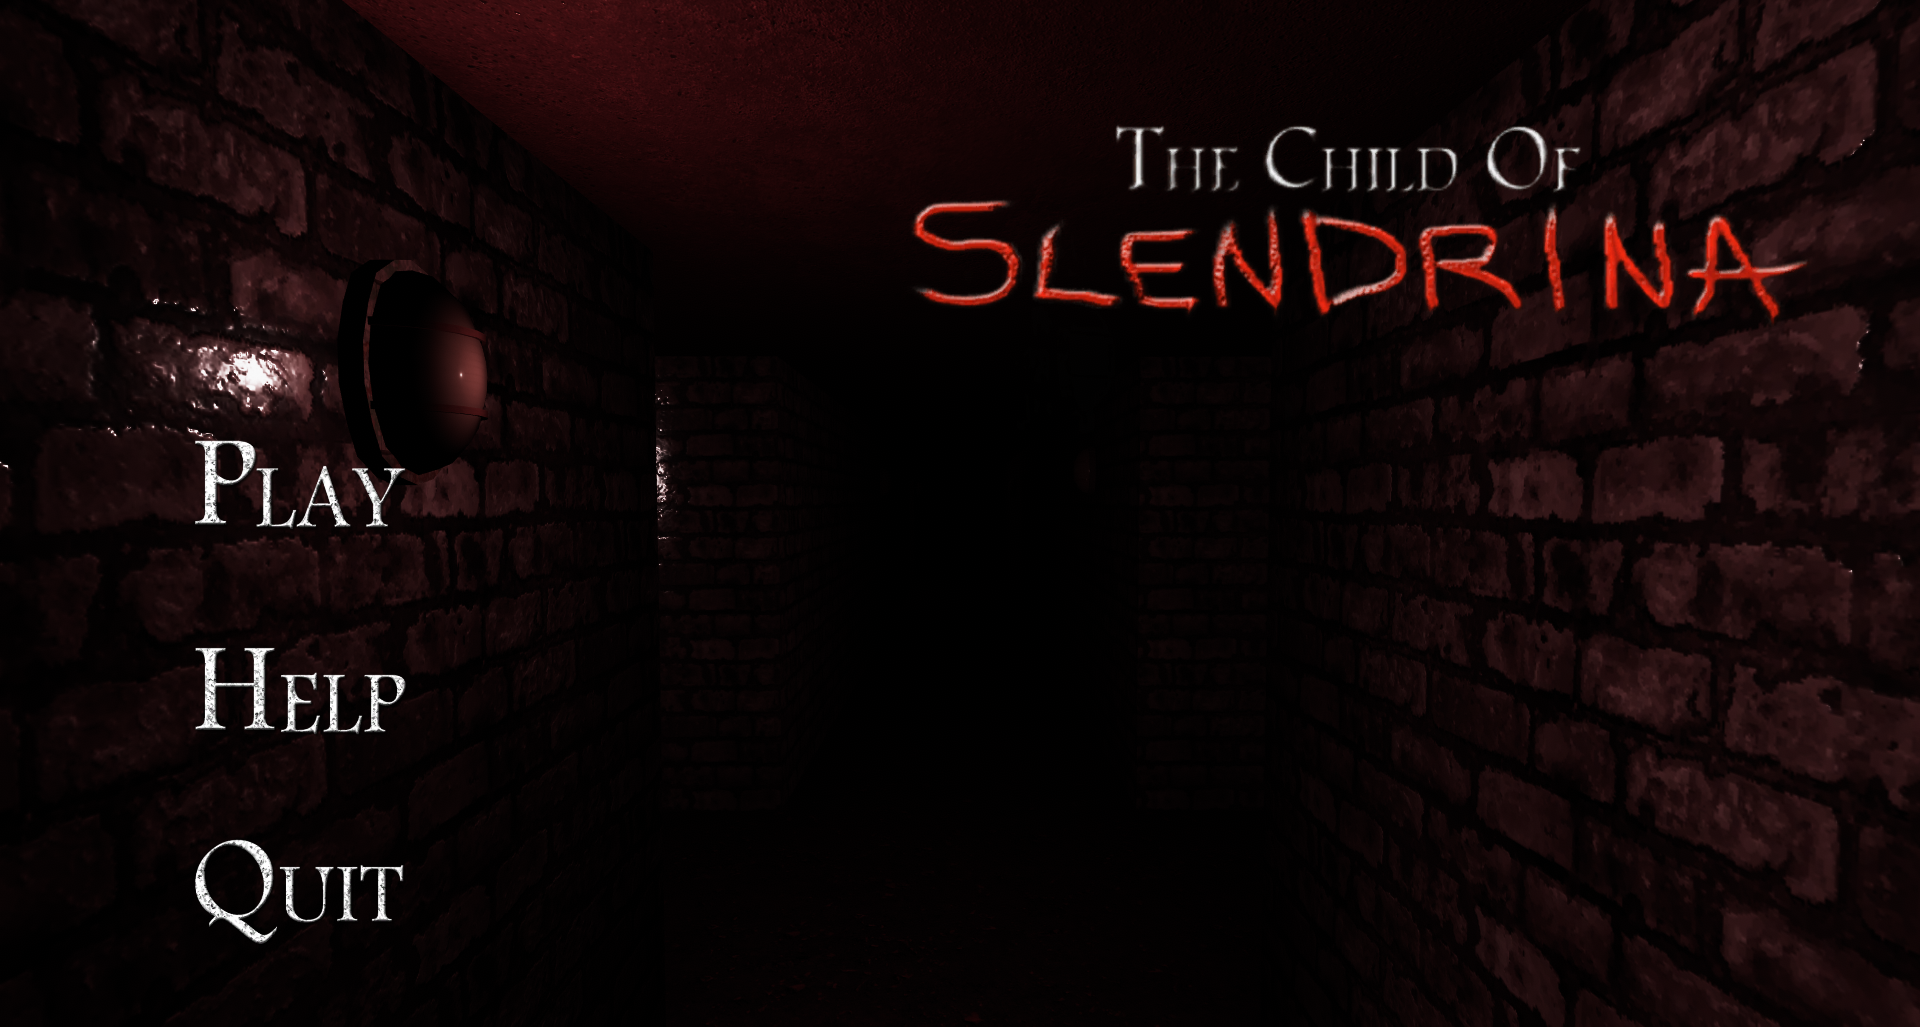 Download The Child Of Slendrina android on PC